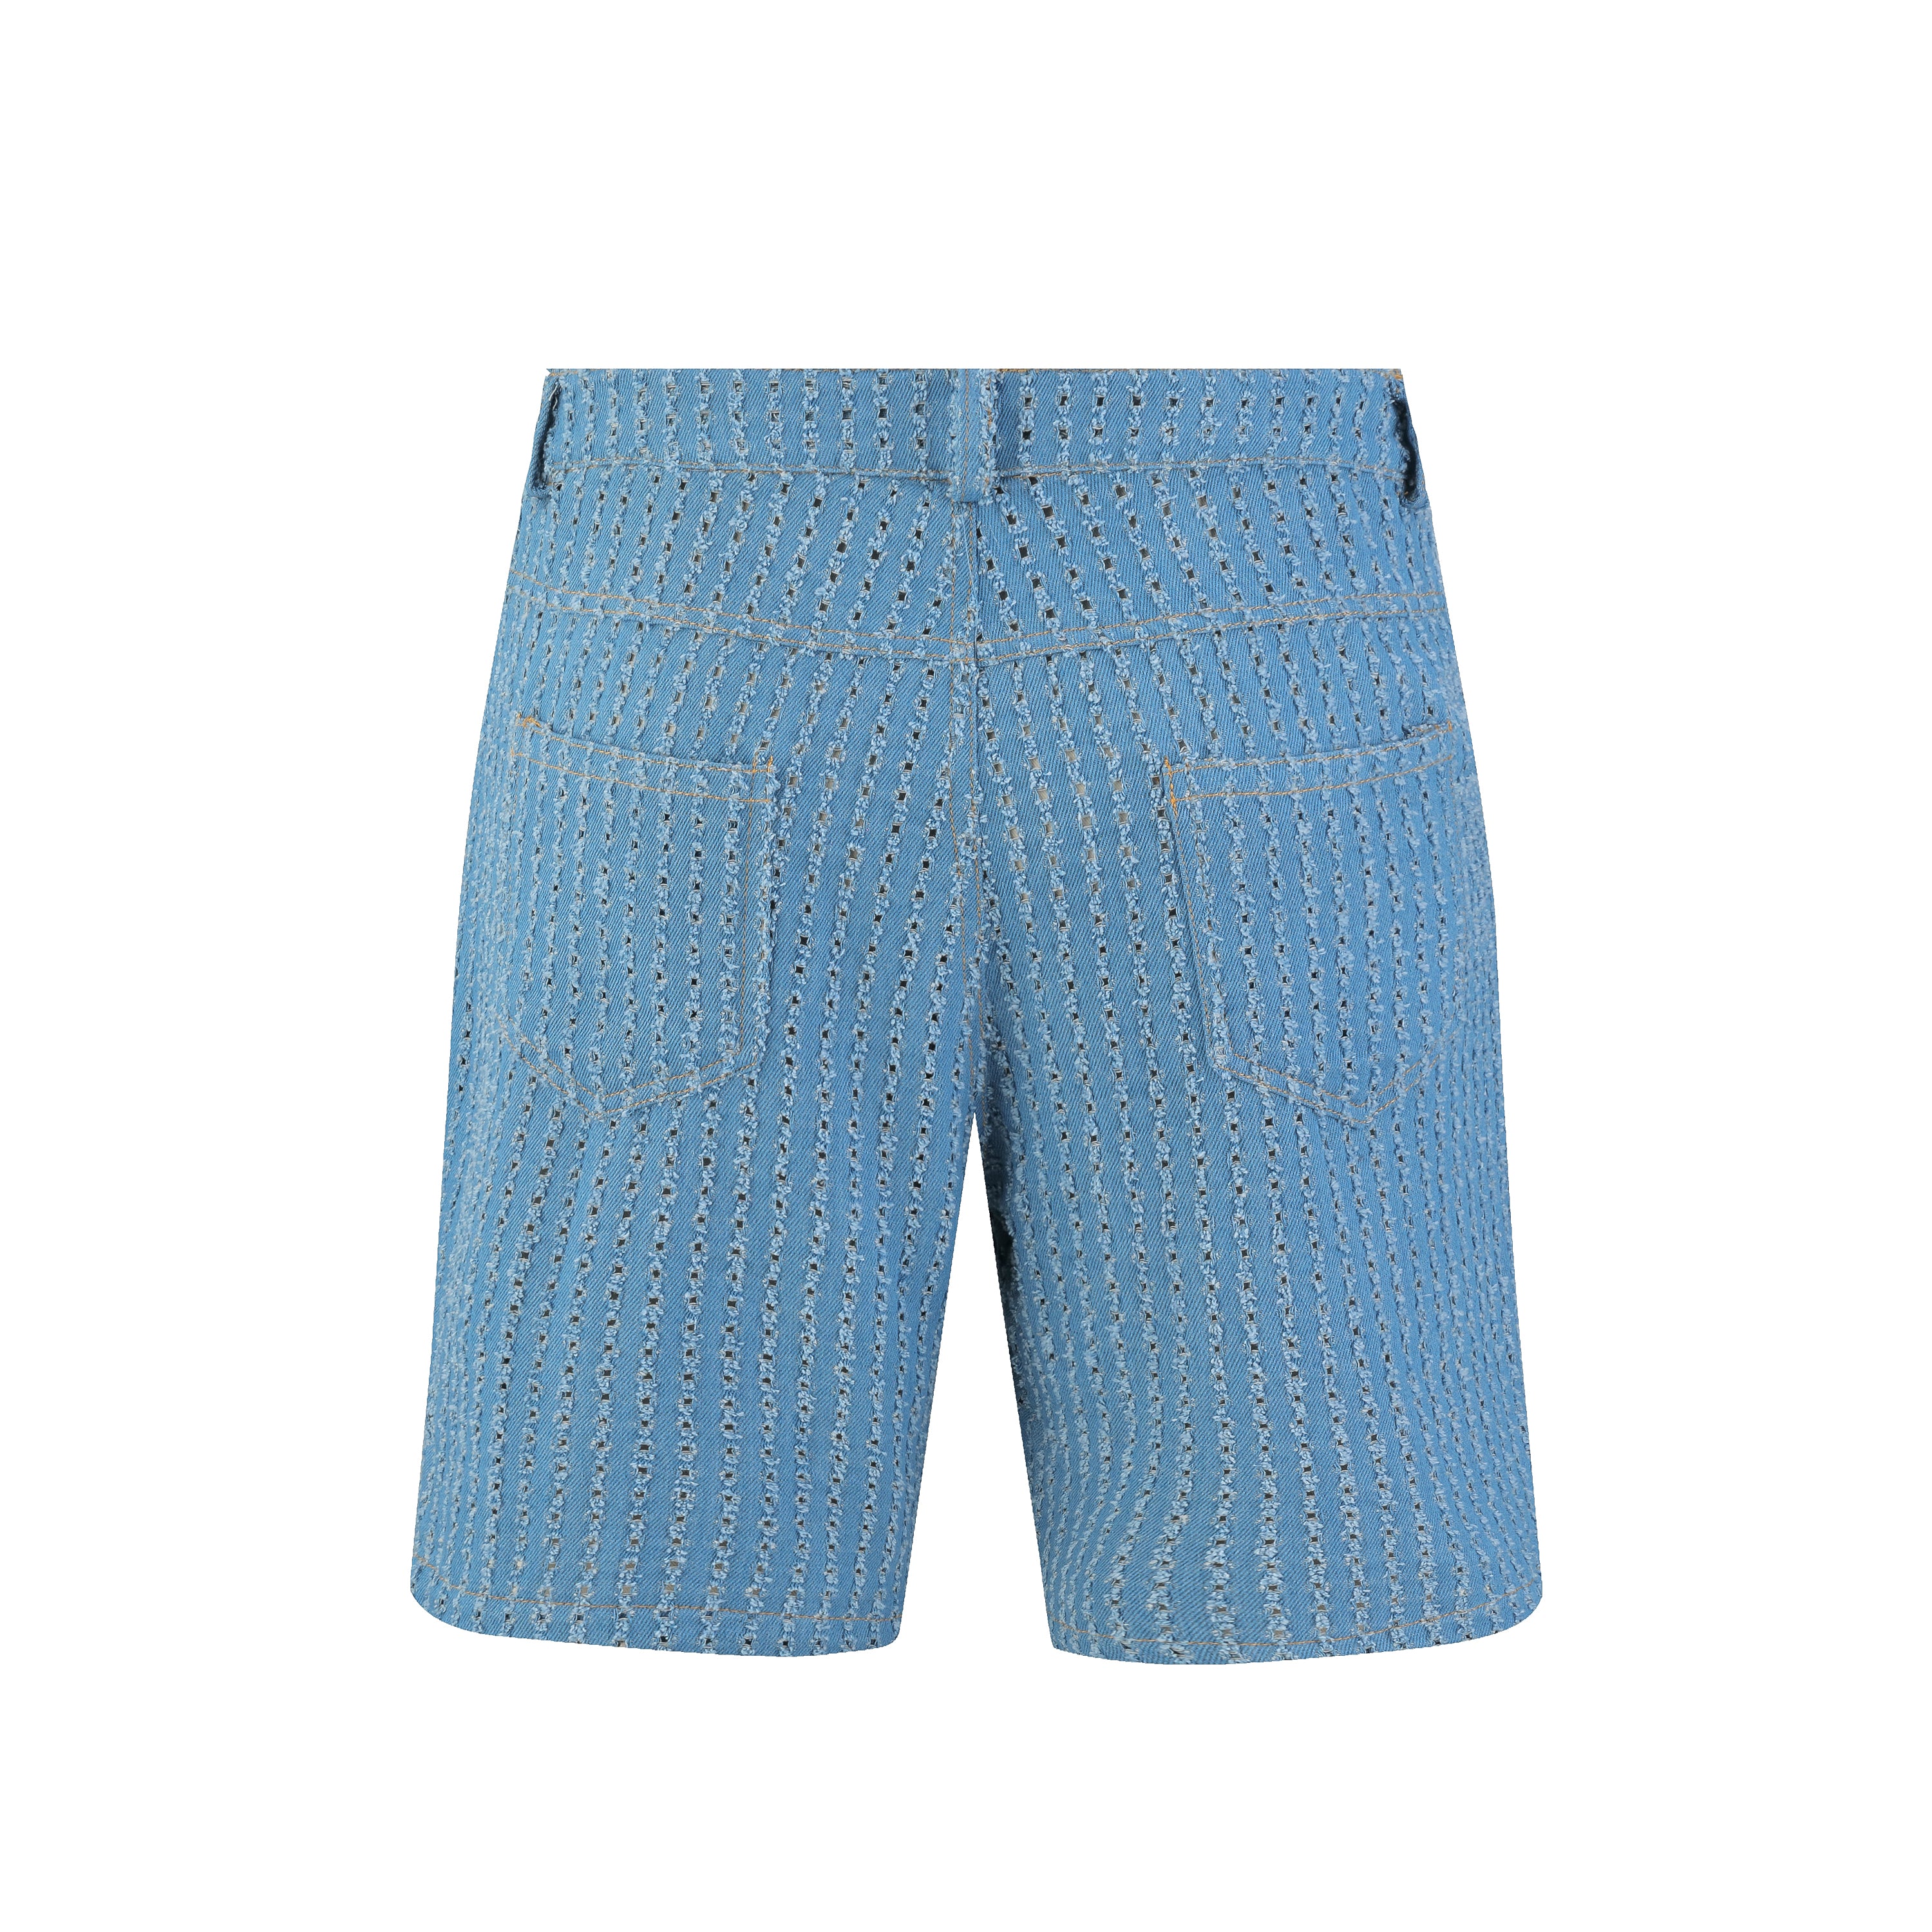 Straight shorts with hole patterns